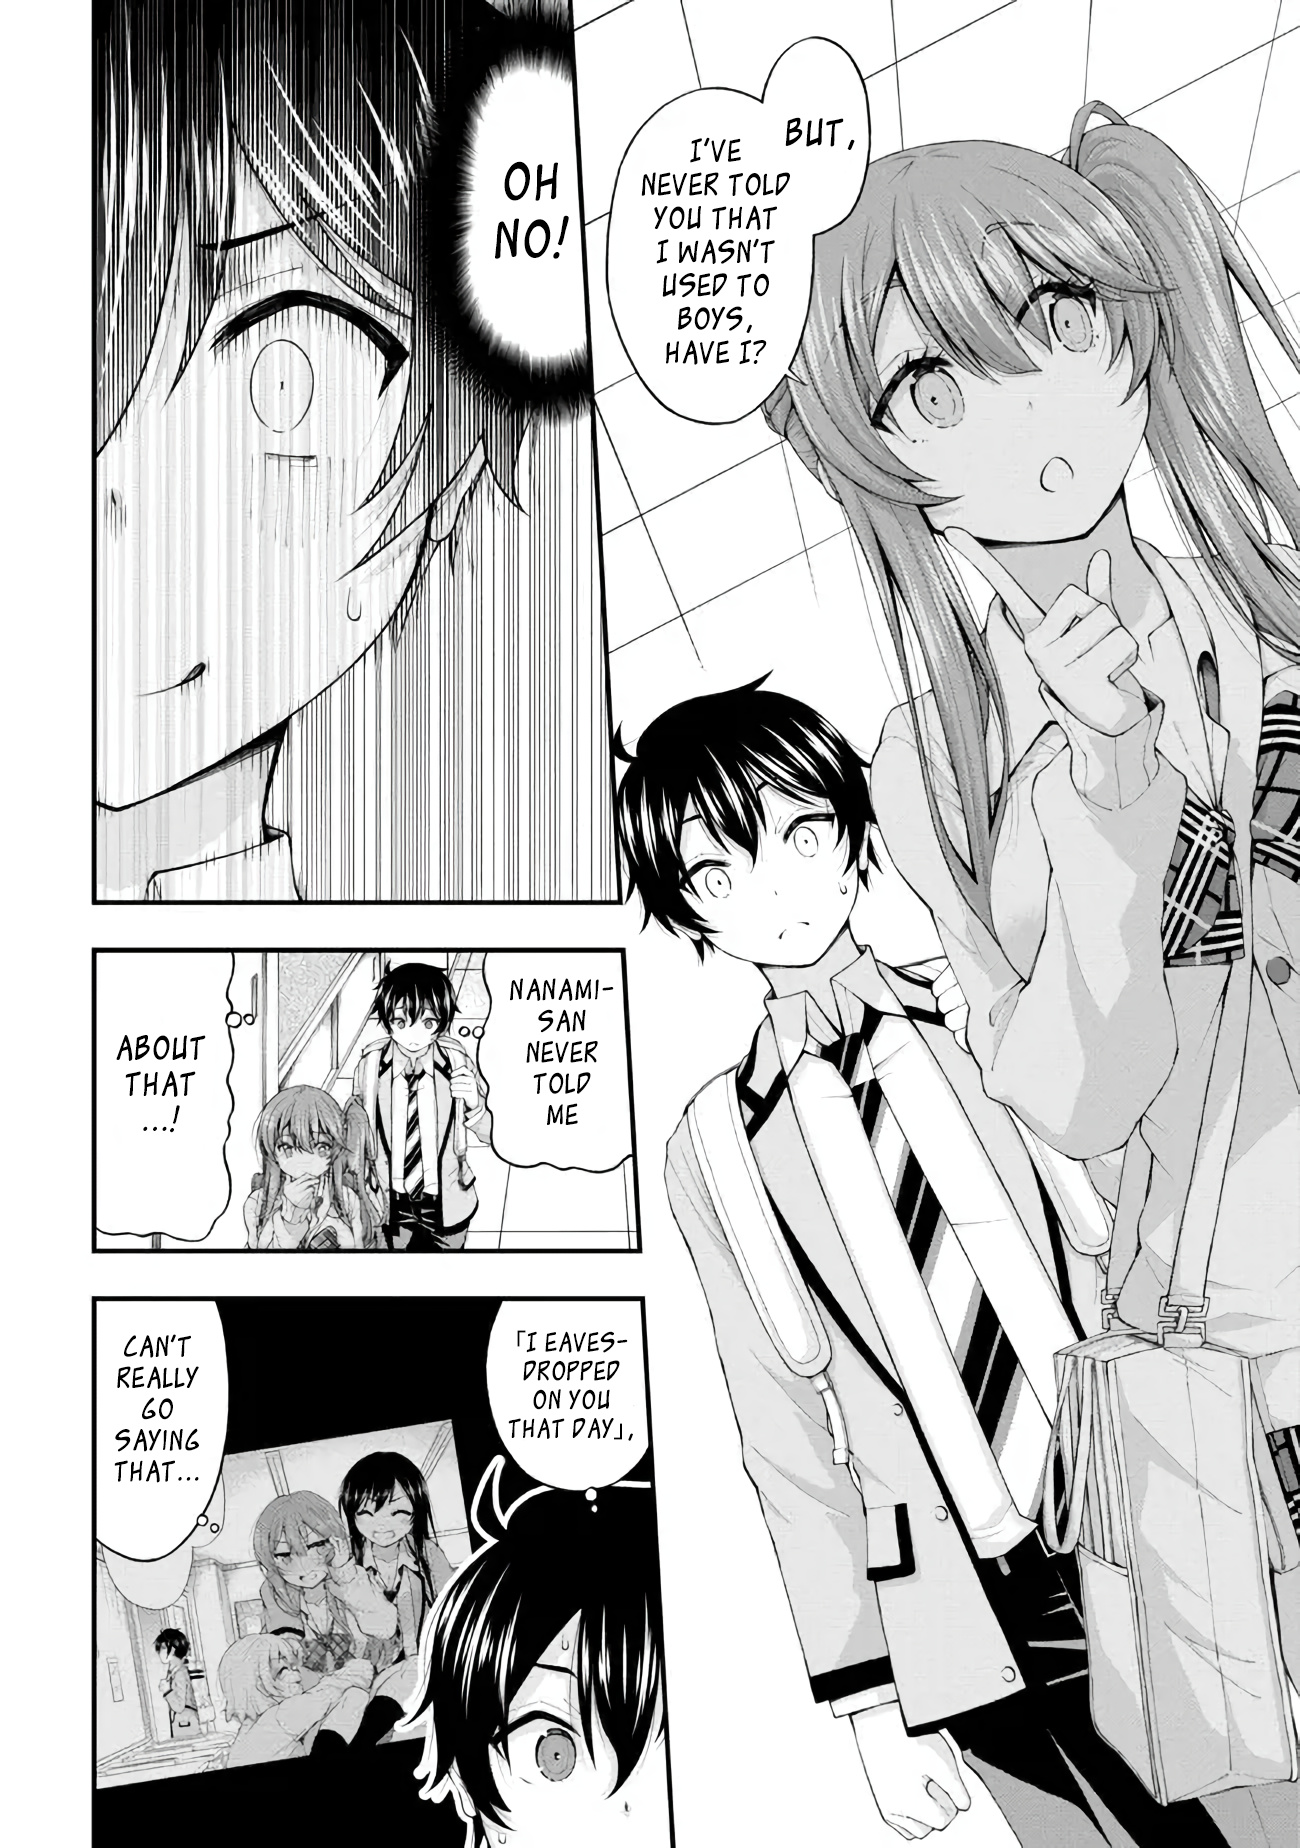 The Gal Who Was Meant To Confess To Me As A Game Punishment Has Apparently Fallen In Love With Me Chapter 5 #10